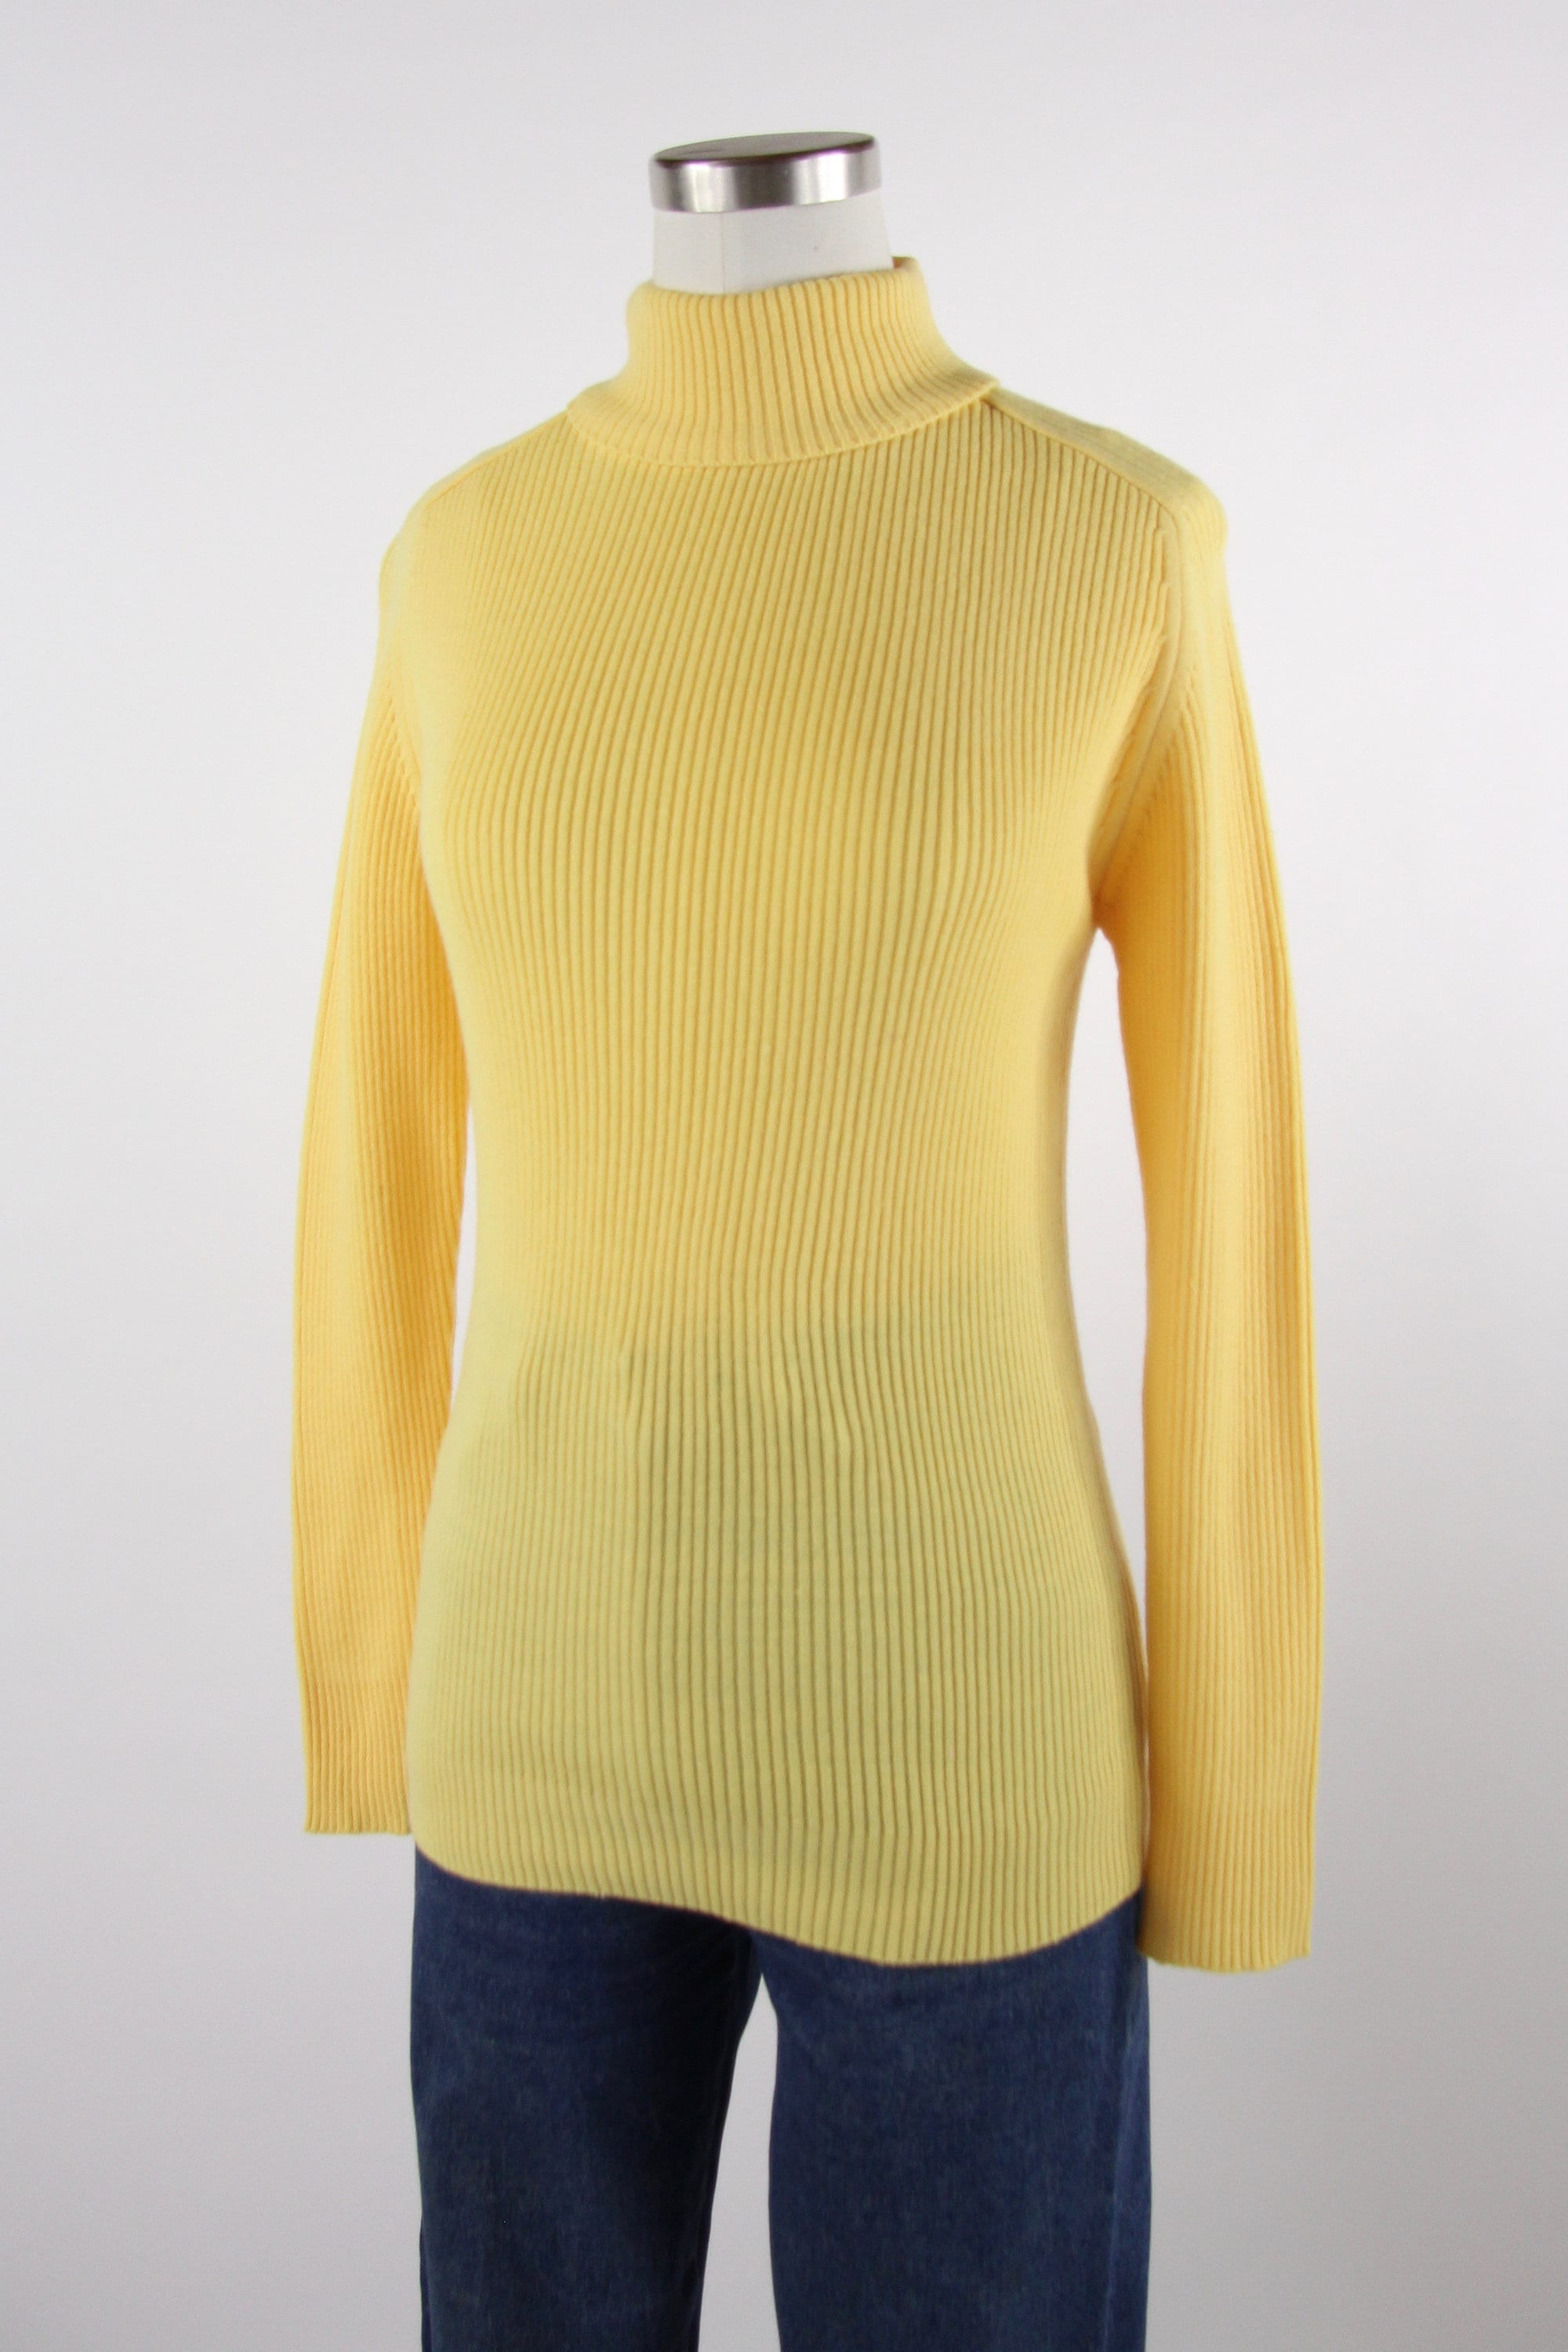 Women's Yellow Long Sleeve 70's Turtleneck Sweater Vintage Size Small ...